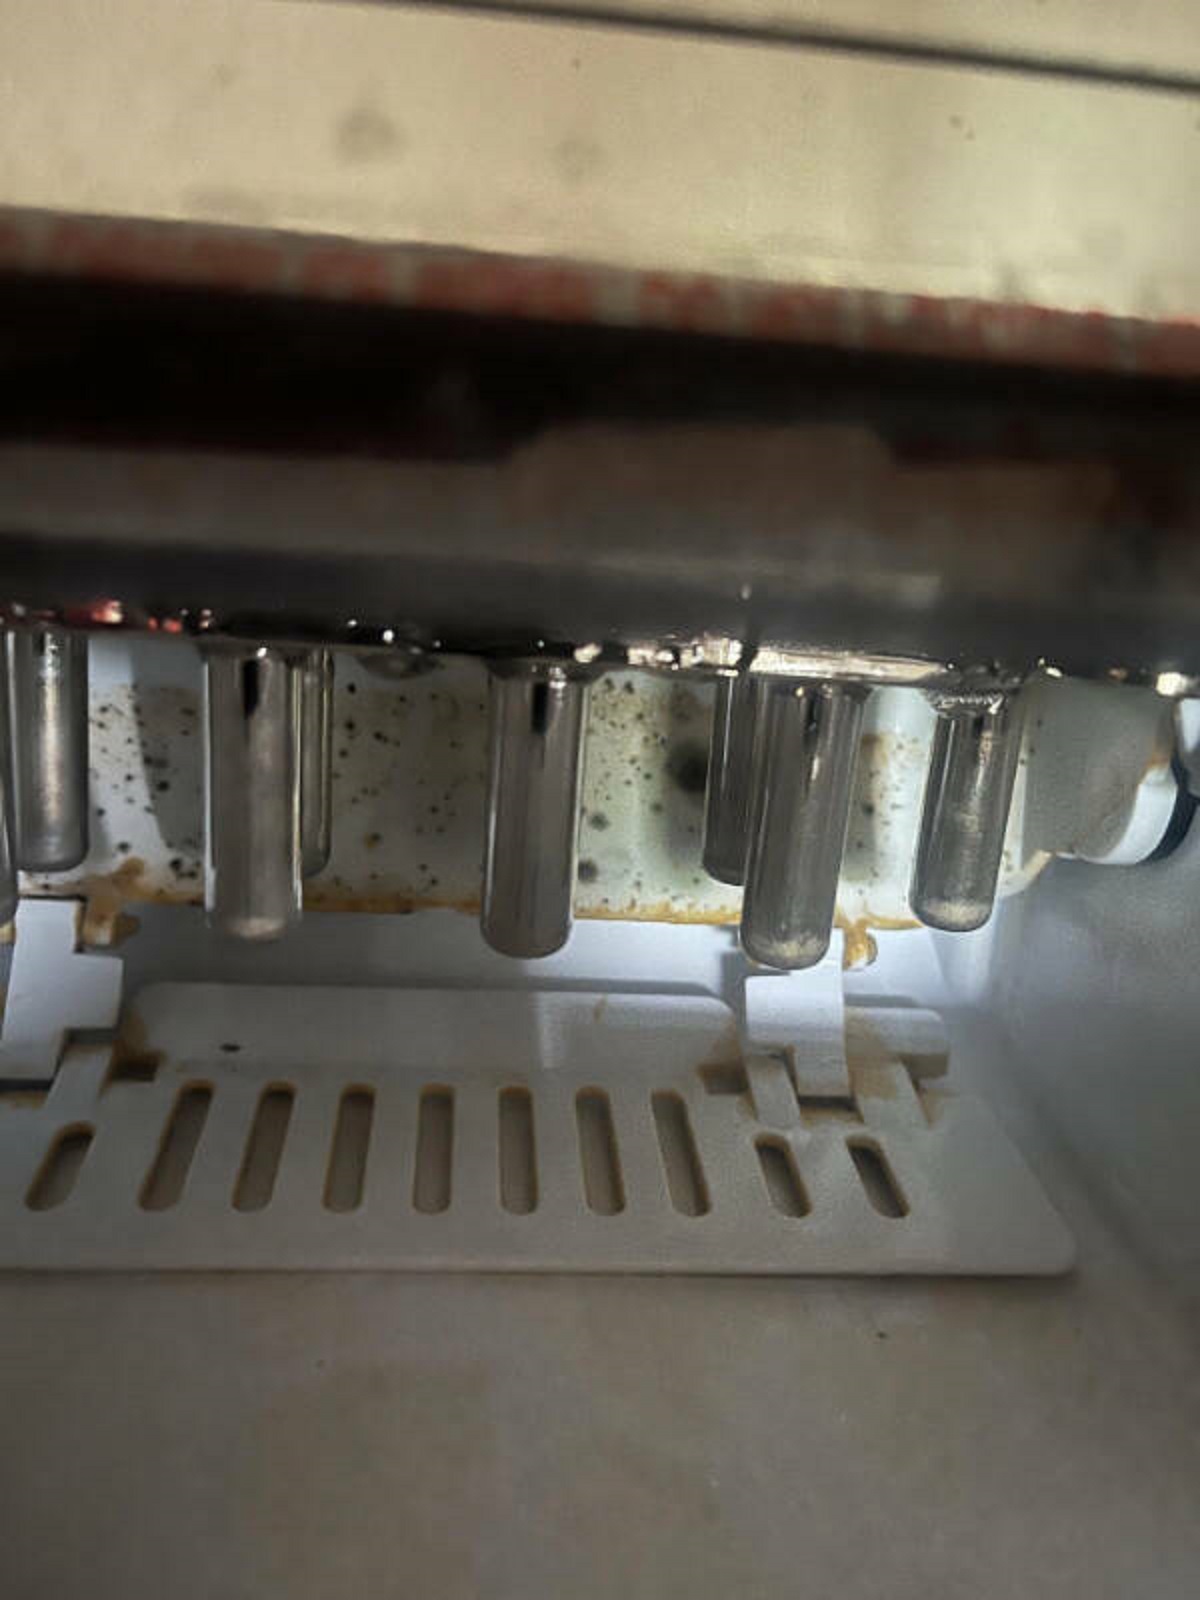 “Just noticed that there’s mold growing in my ice maker. I got it a few months ago.”